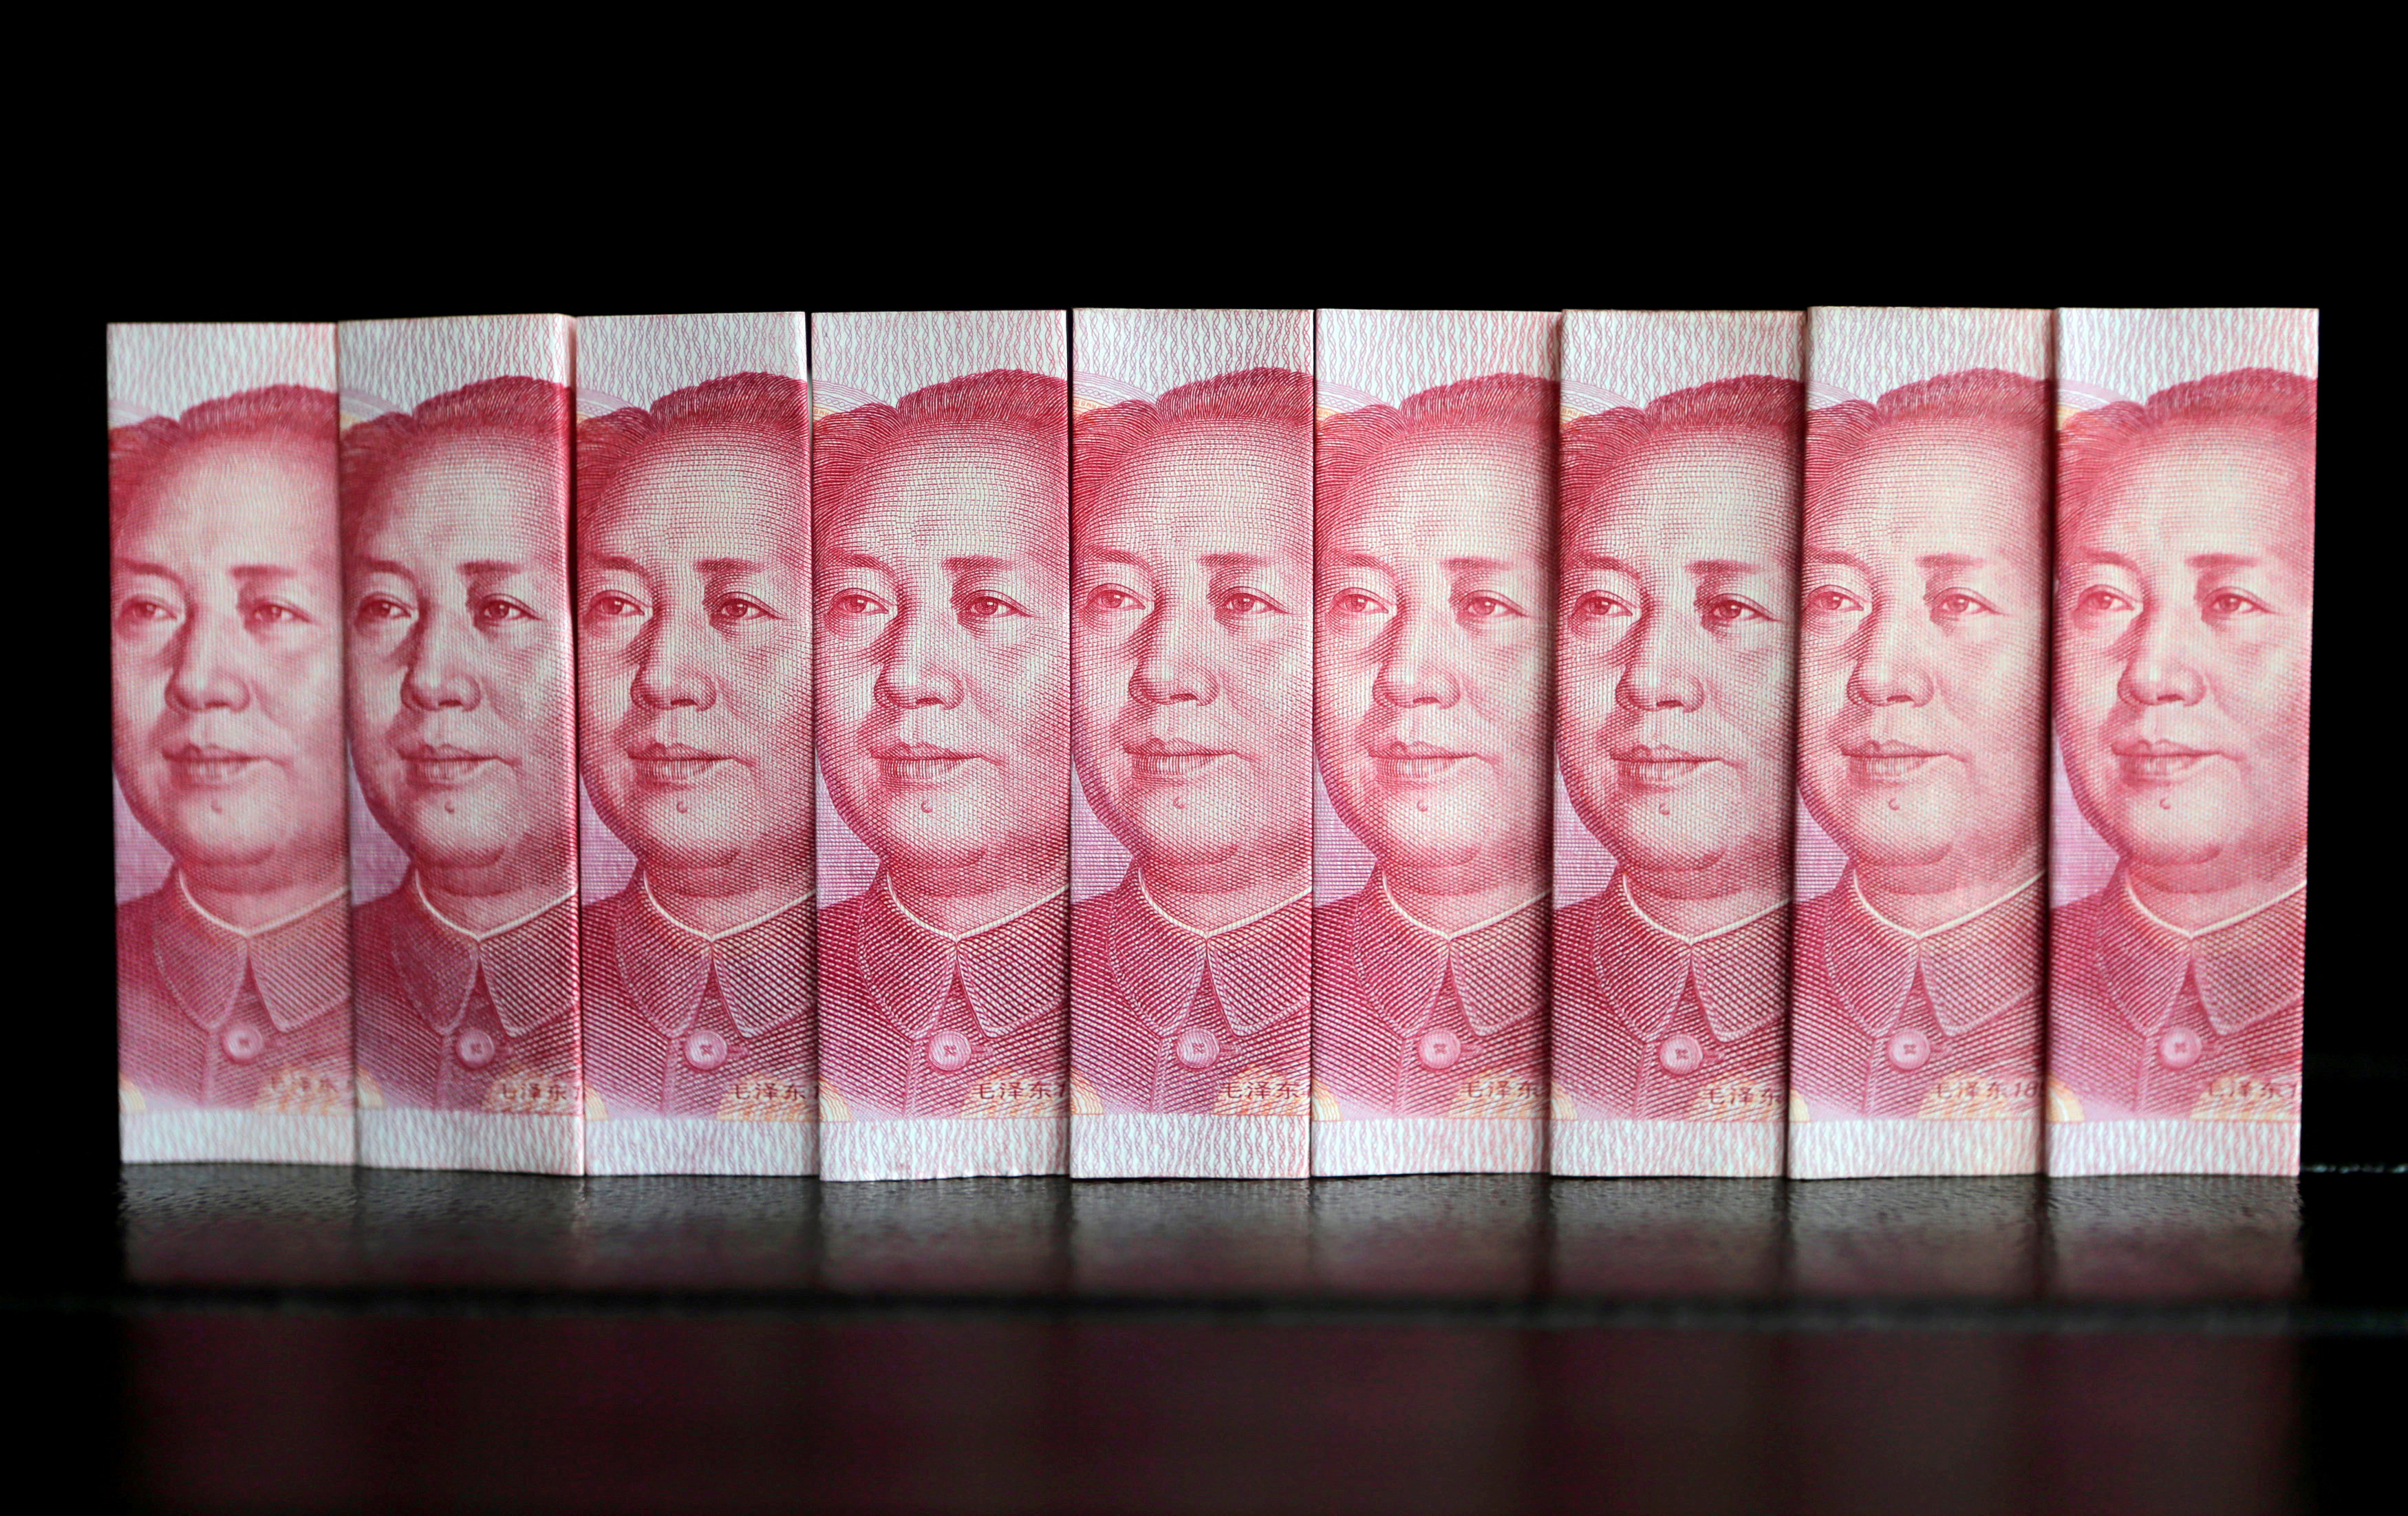 China says it won't devalue currency to bolster exports